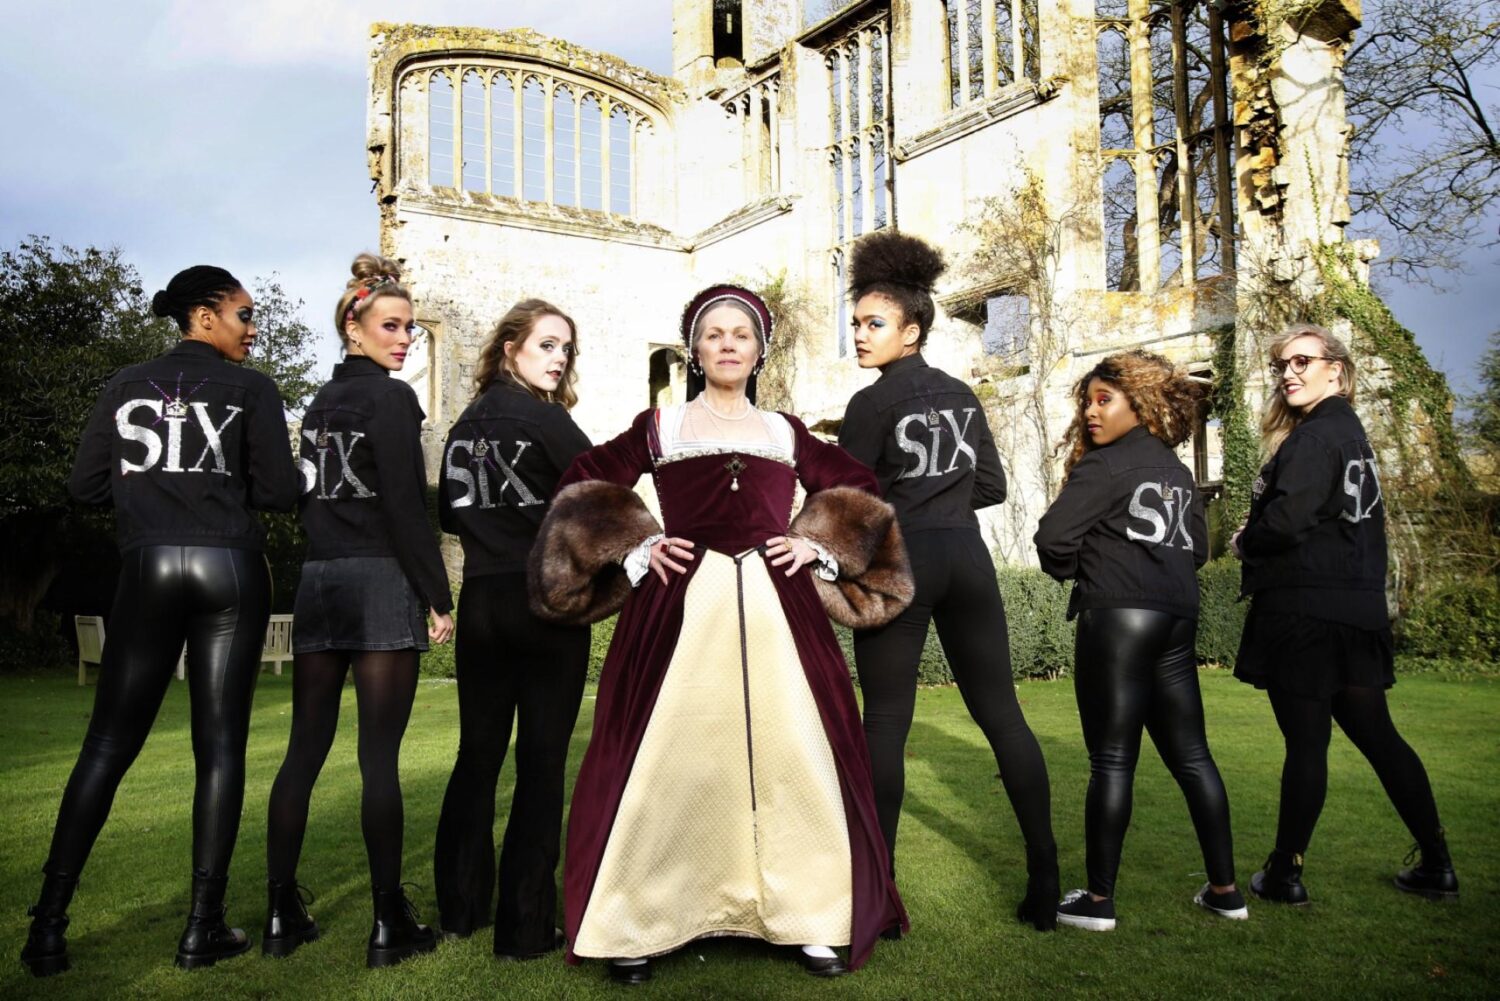 Cast of Six the Musical with traditional Katherine Parr reenactor